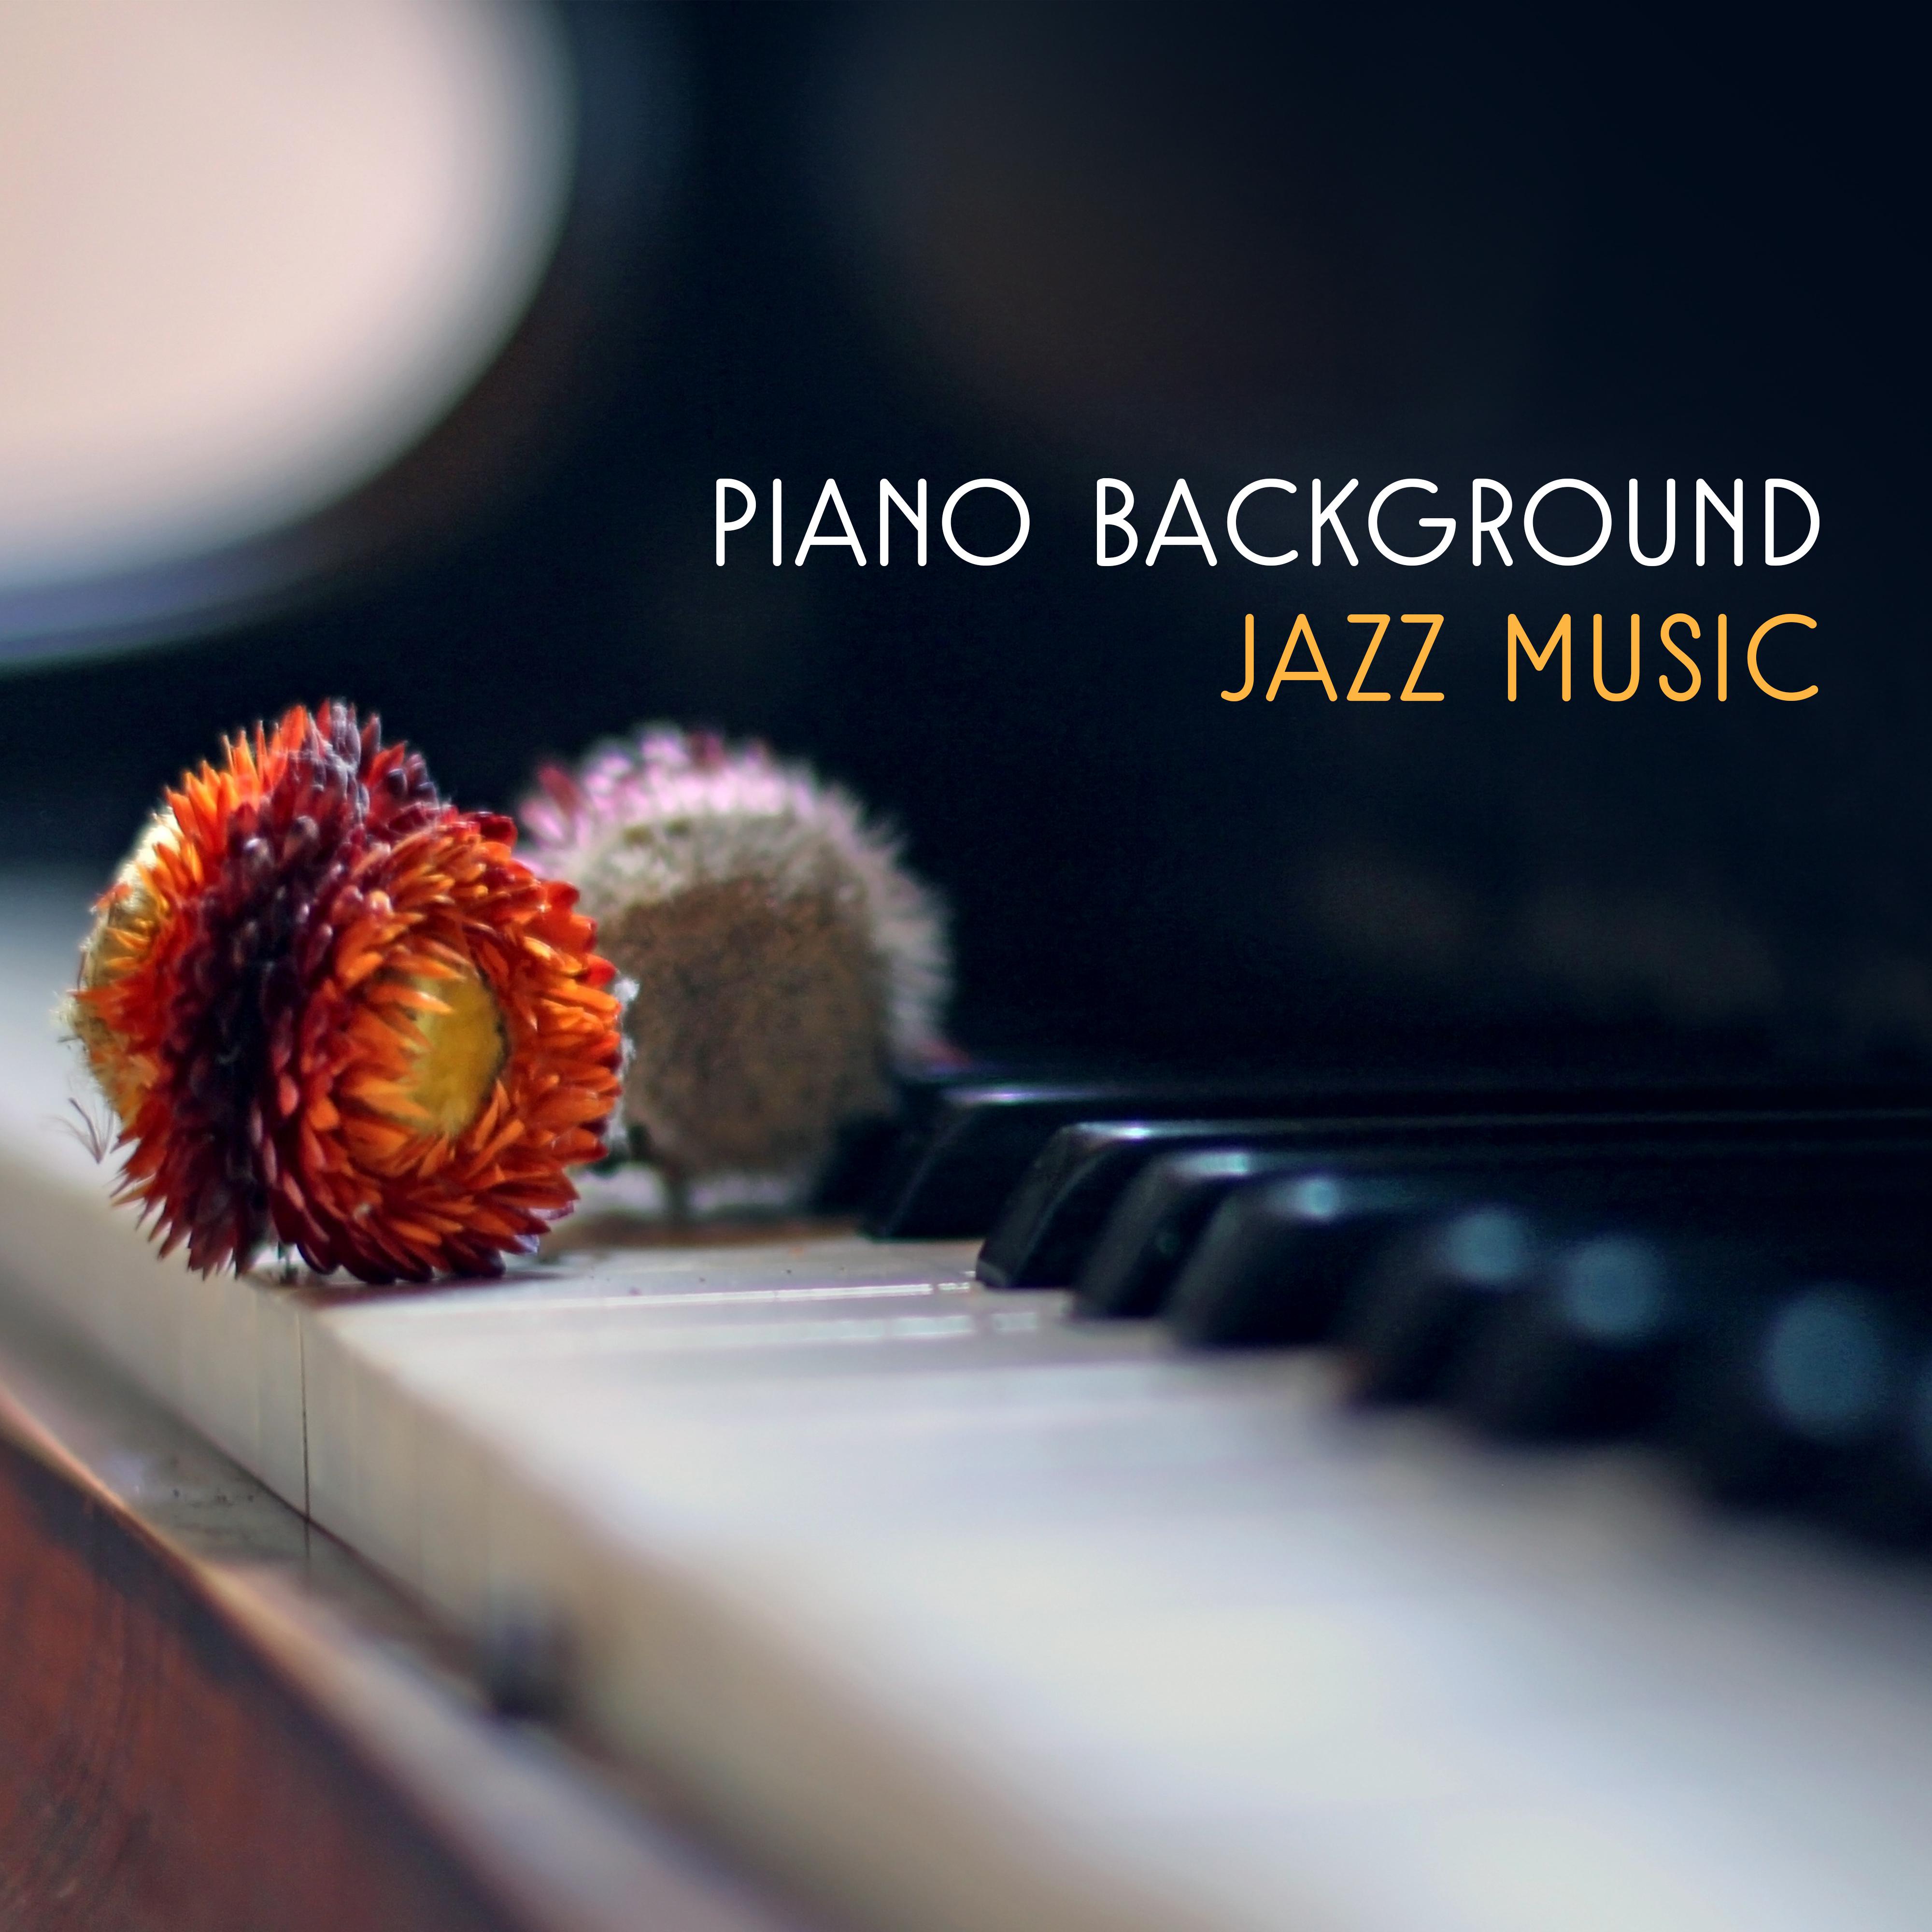 Piano Background Jazz Music  Soft Jazz to Relax, Peaceful Songs to Rest, Mellow Music, Shades of Jazz